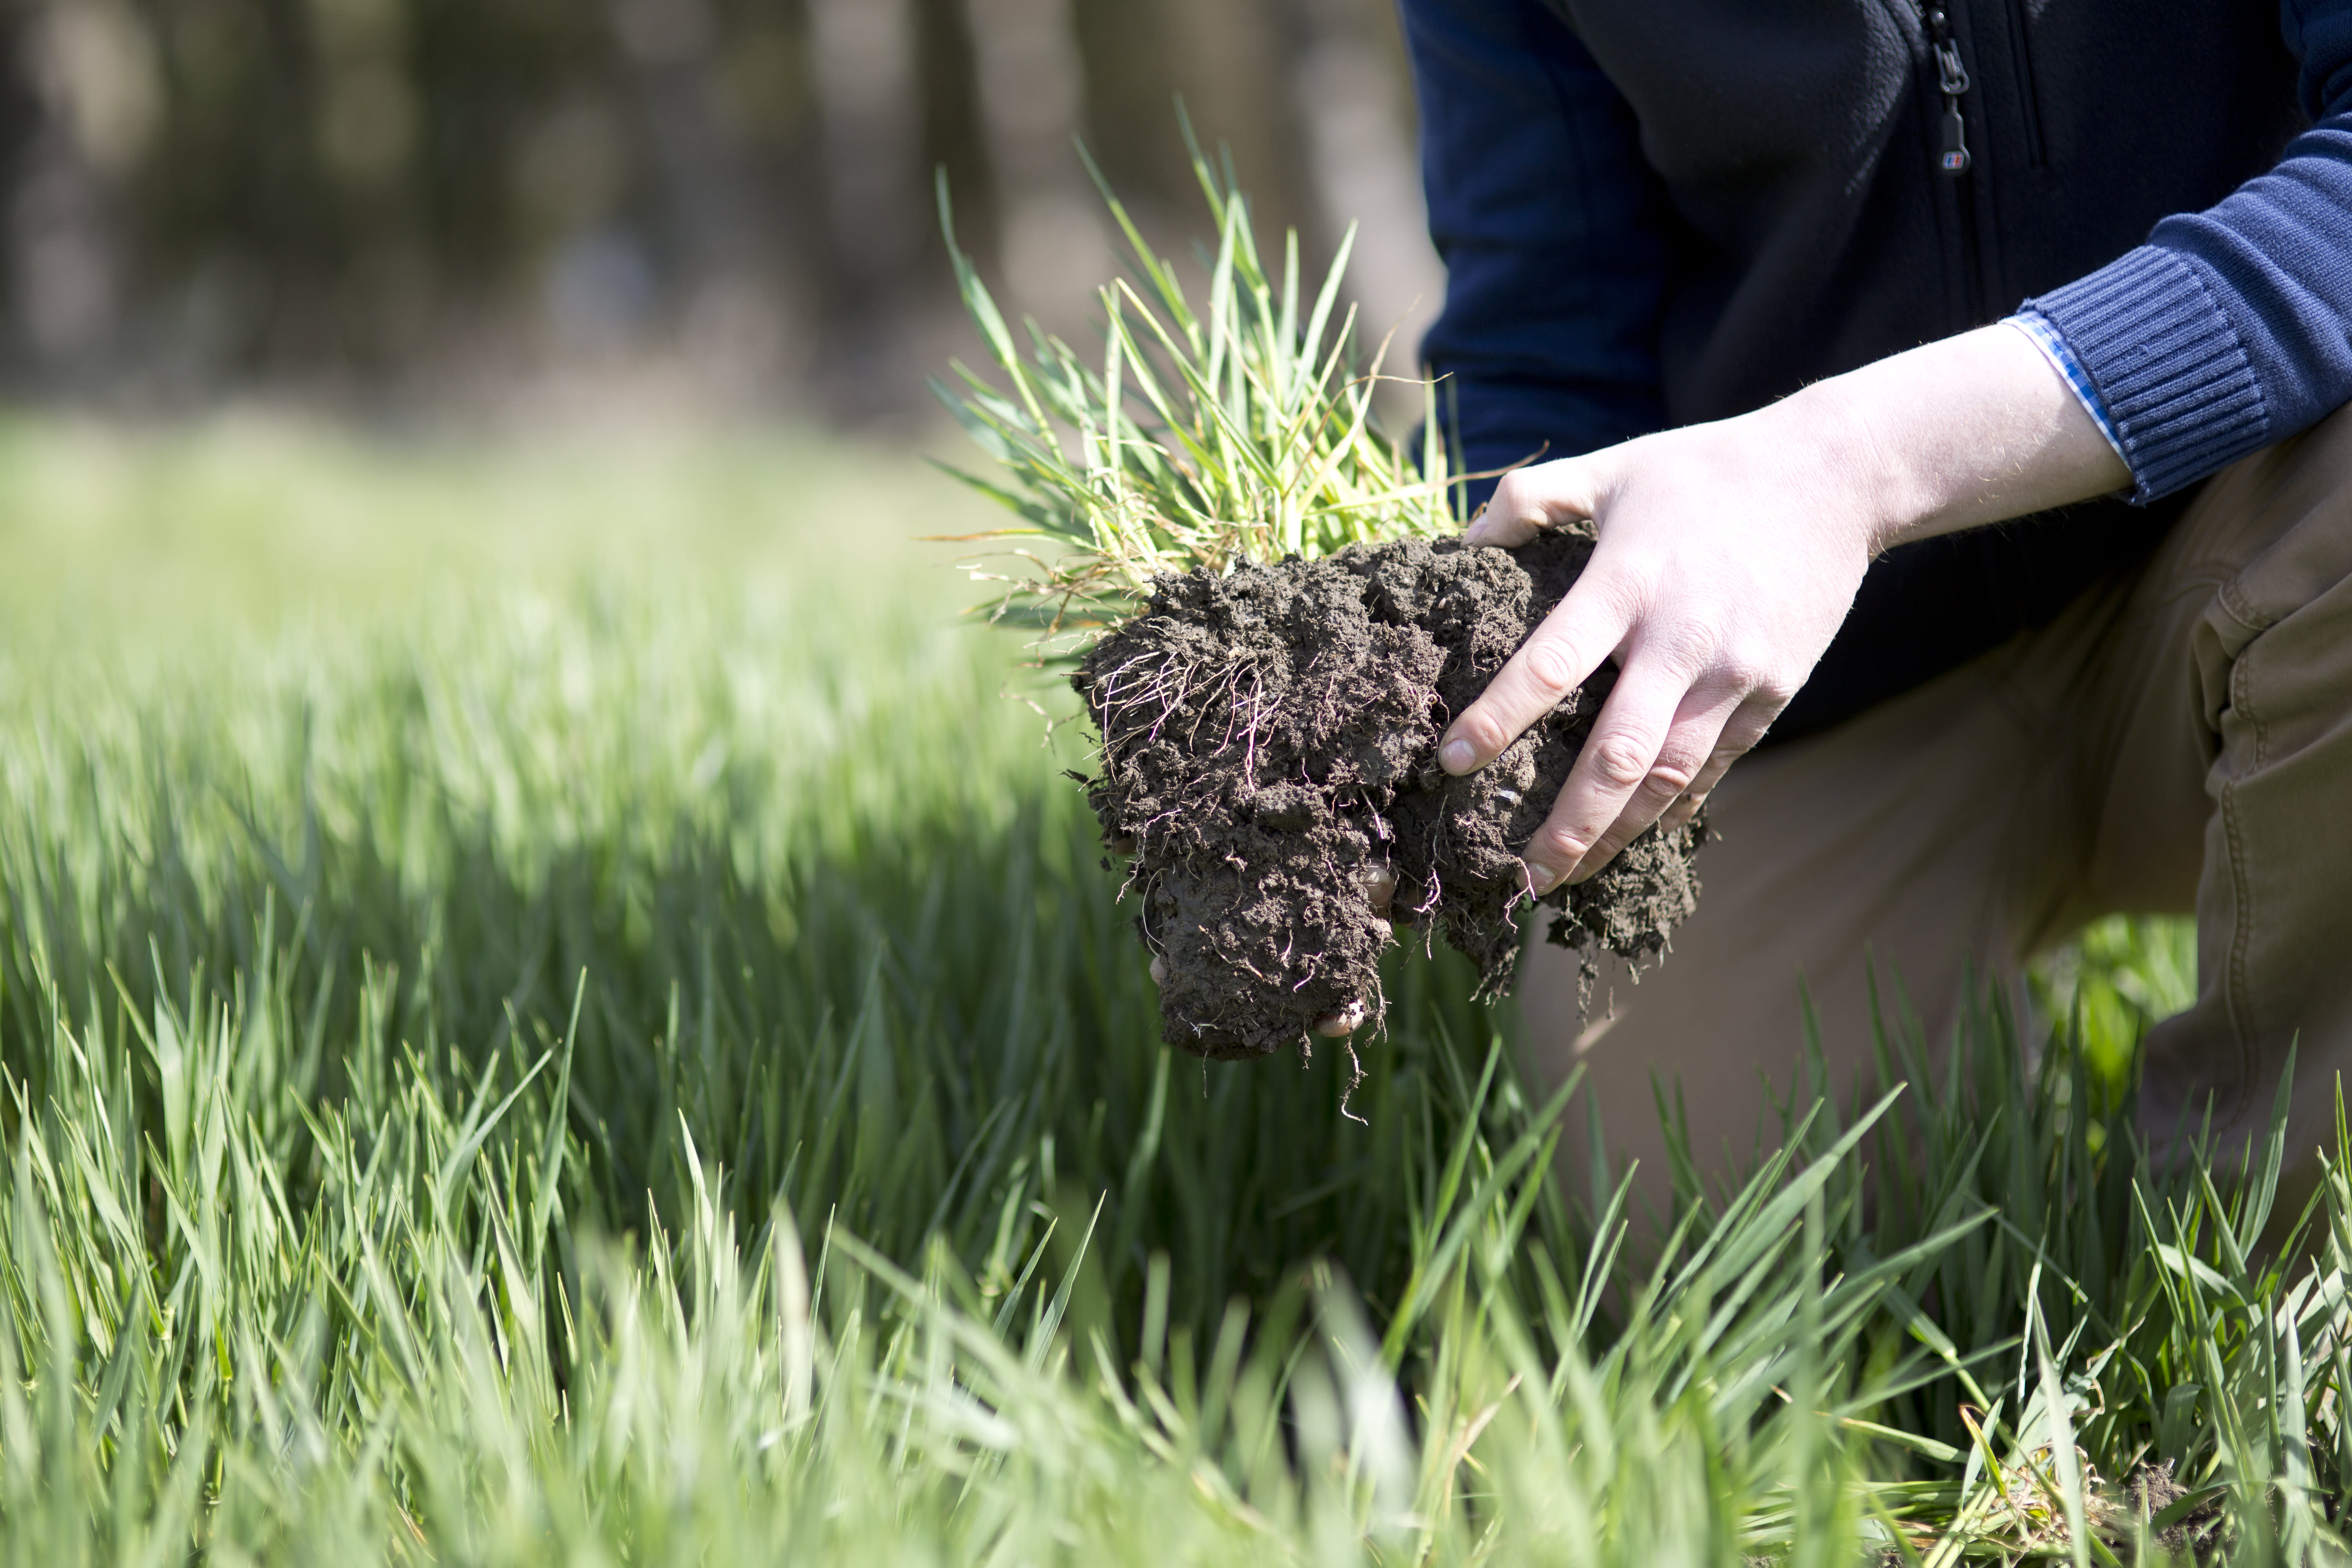 A farmer's hand placing a plant into the soil